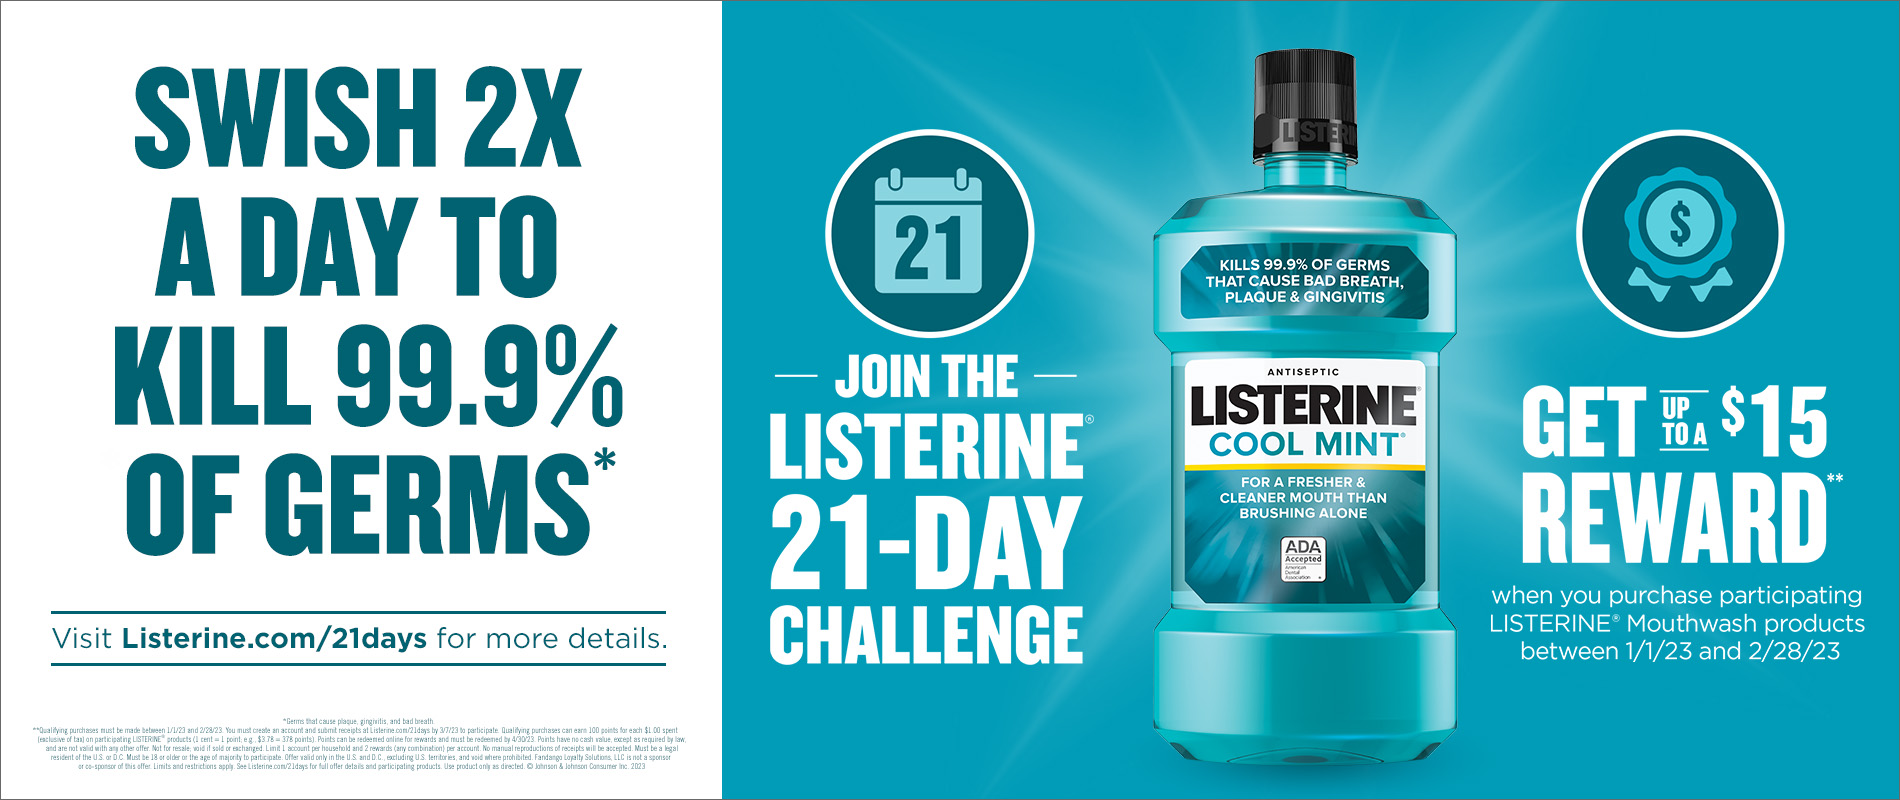 Get Up To A $15 Reward with Listerine 